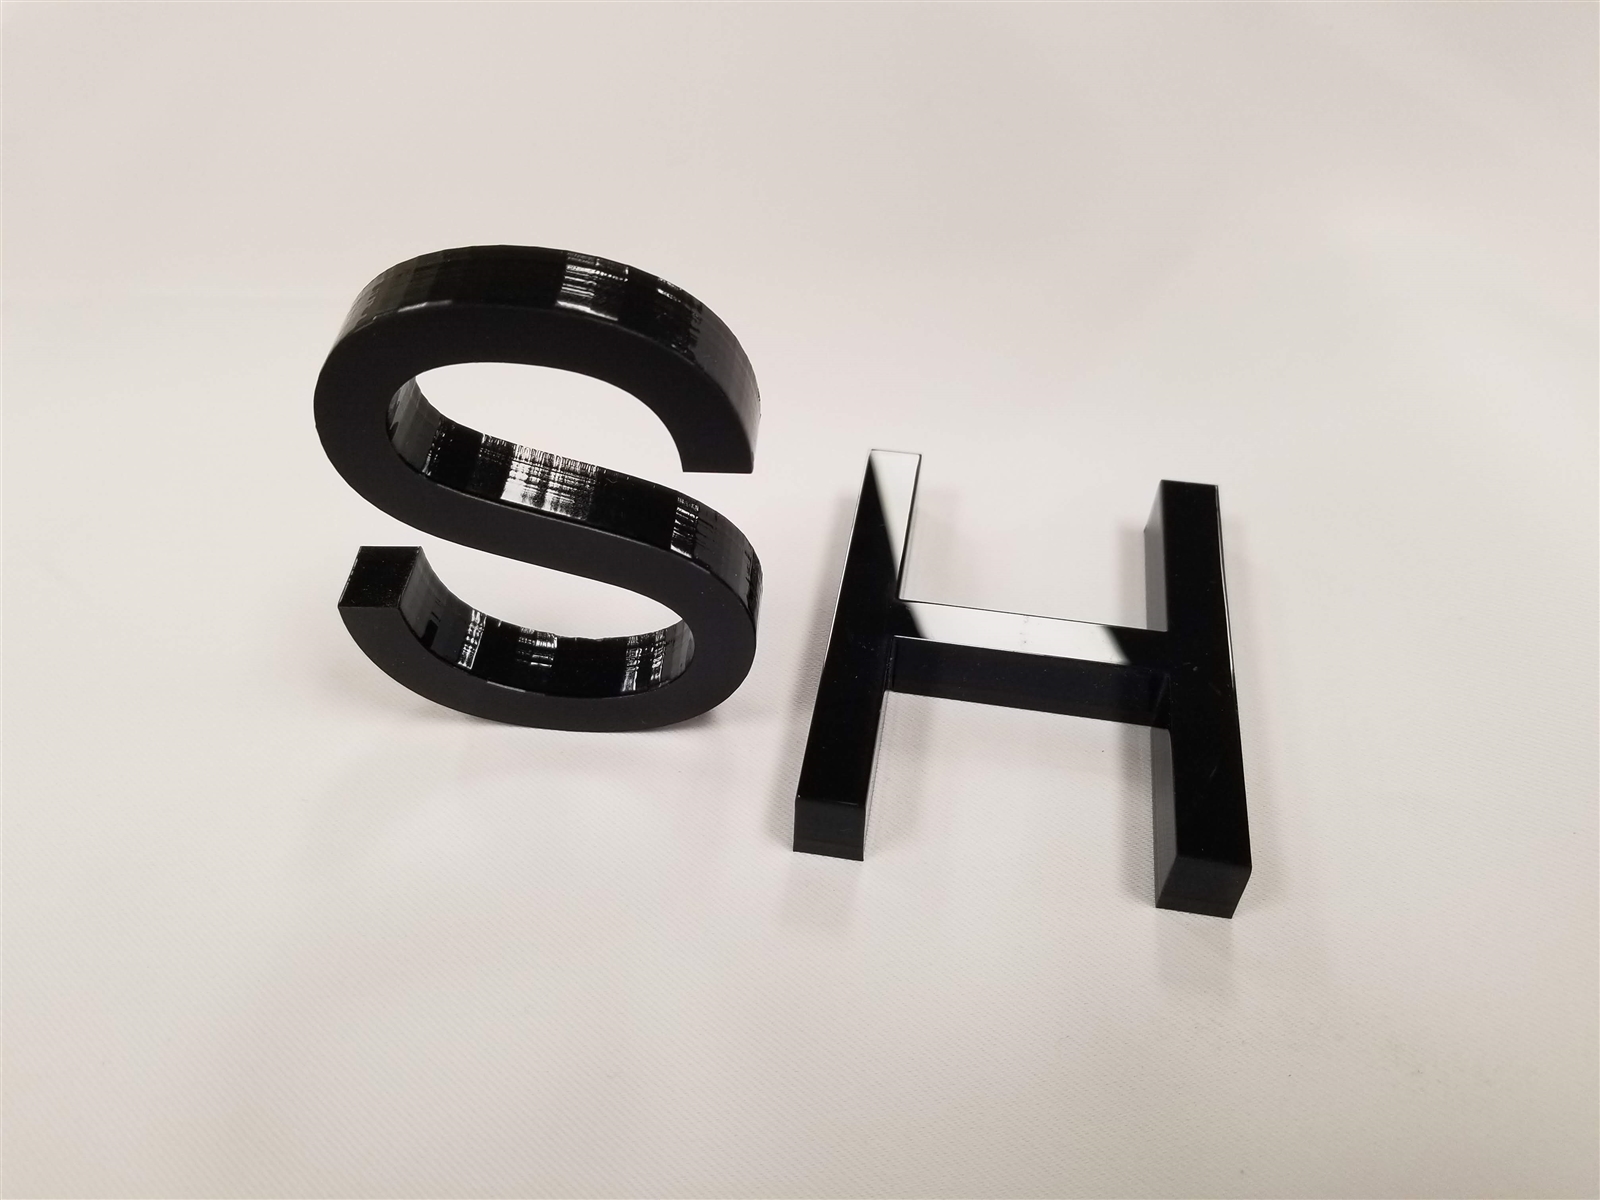 Black Acrylic Laser Cut Letters - 1/8 (3mm) Thick with Tape Backing